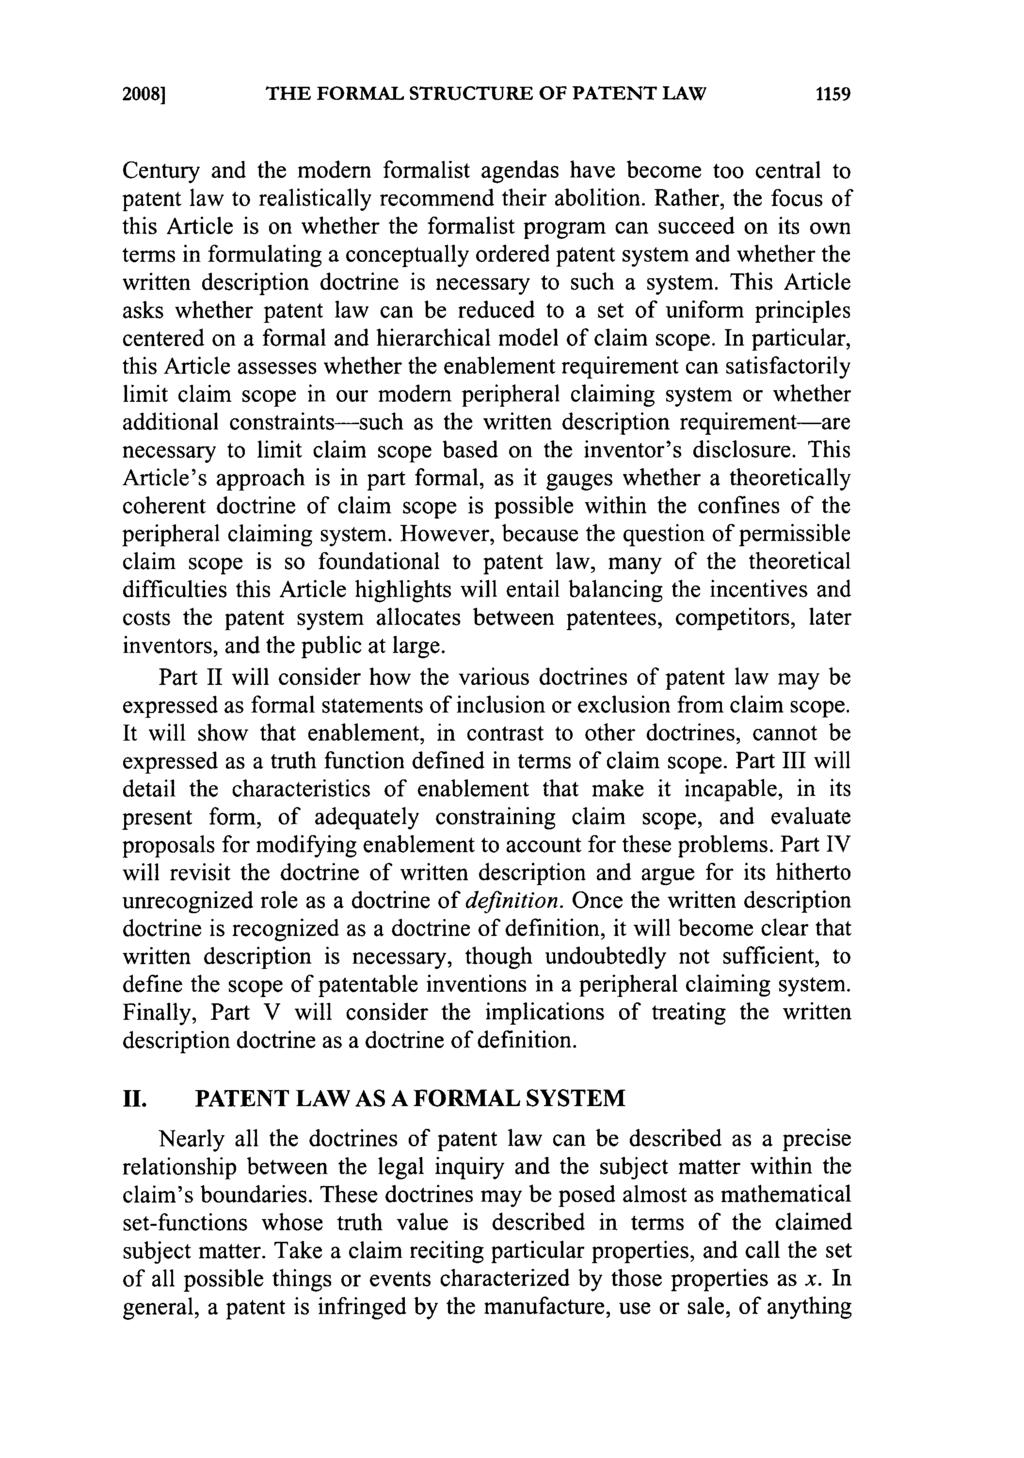 20081 THE FORMAL STRUCTURE OF PATENT LAW 1159 Century and the modem formalist agendas have become too central to patent law to realistically recommend their abolition.